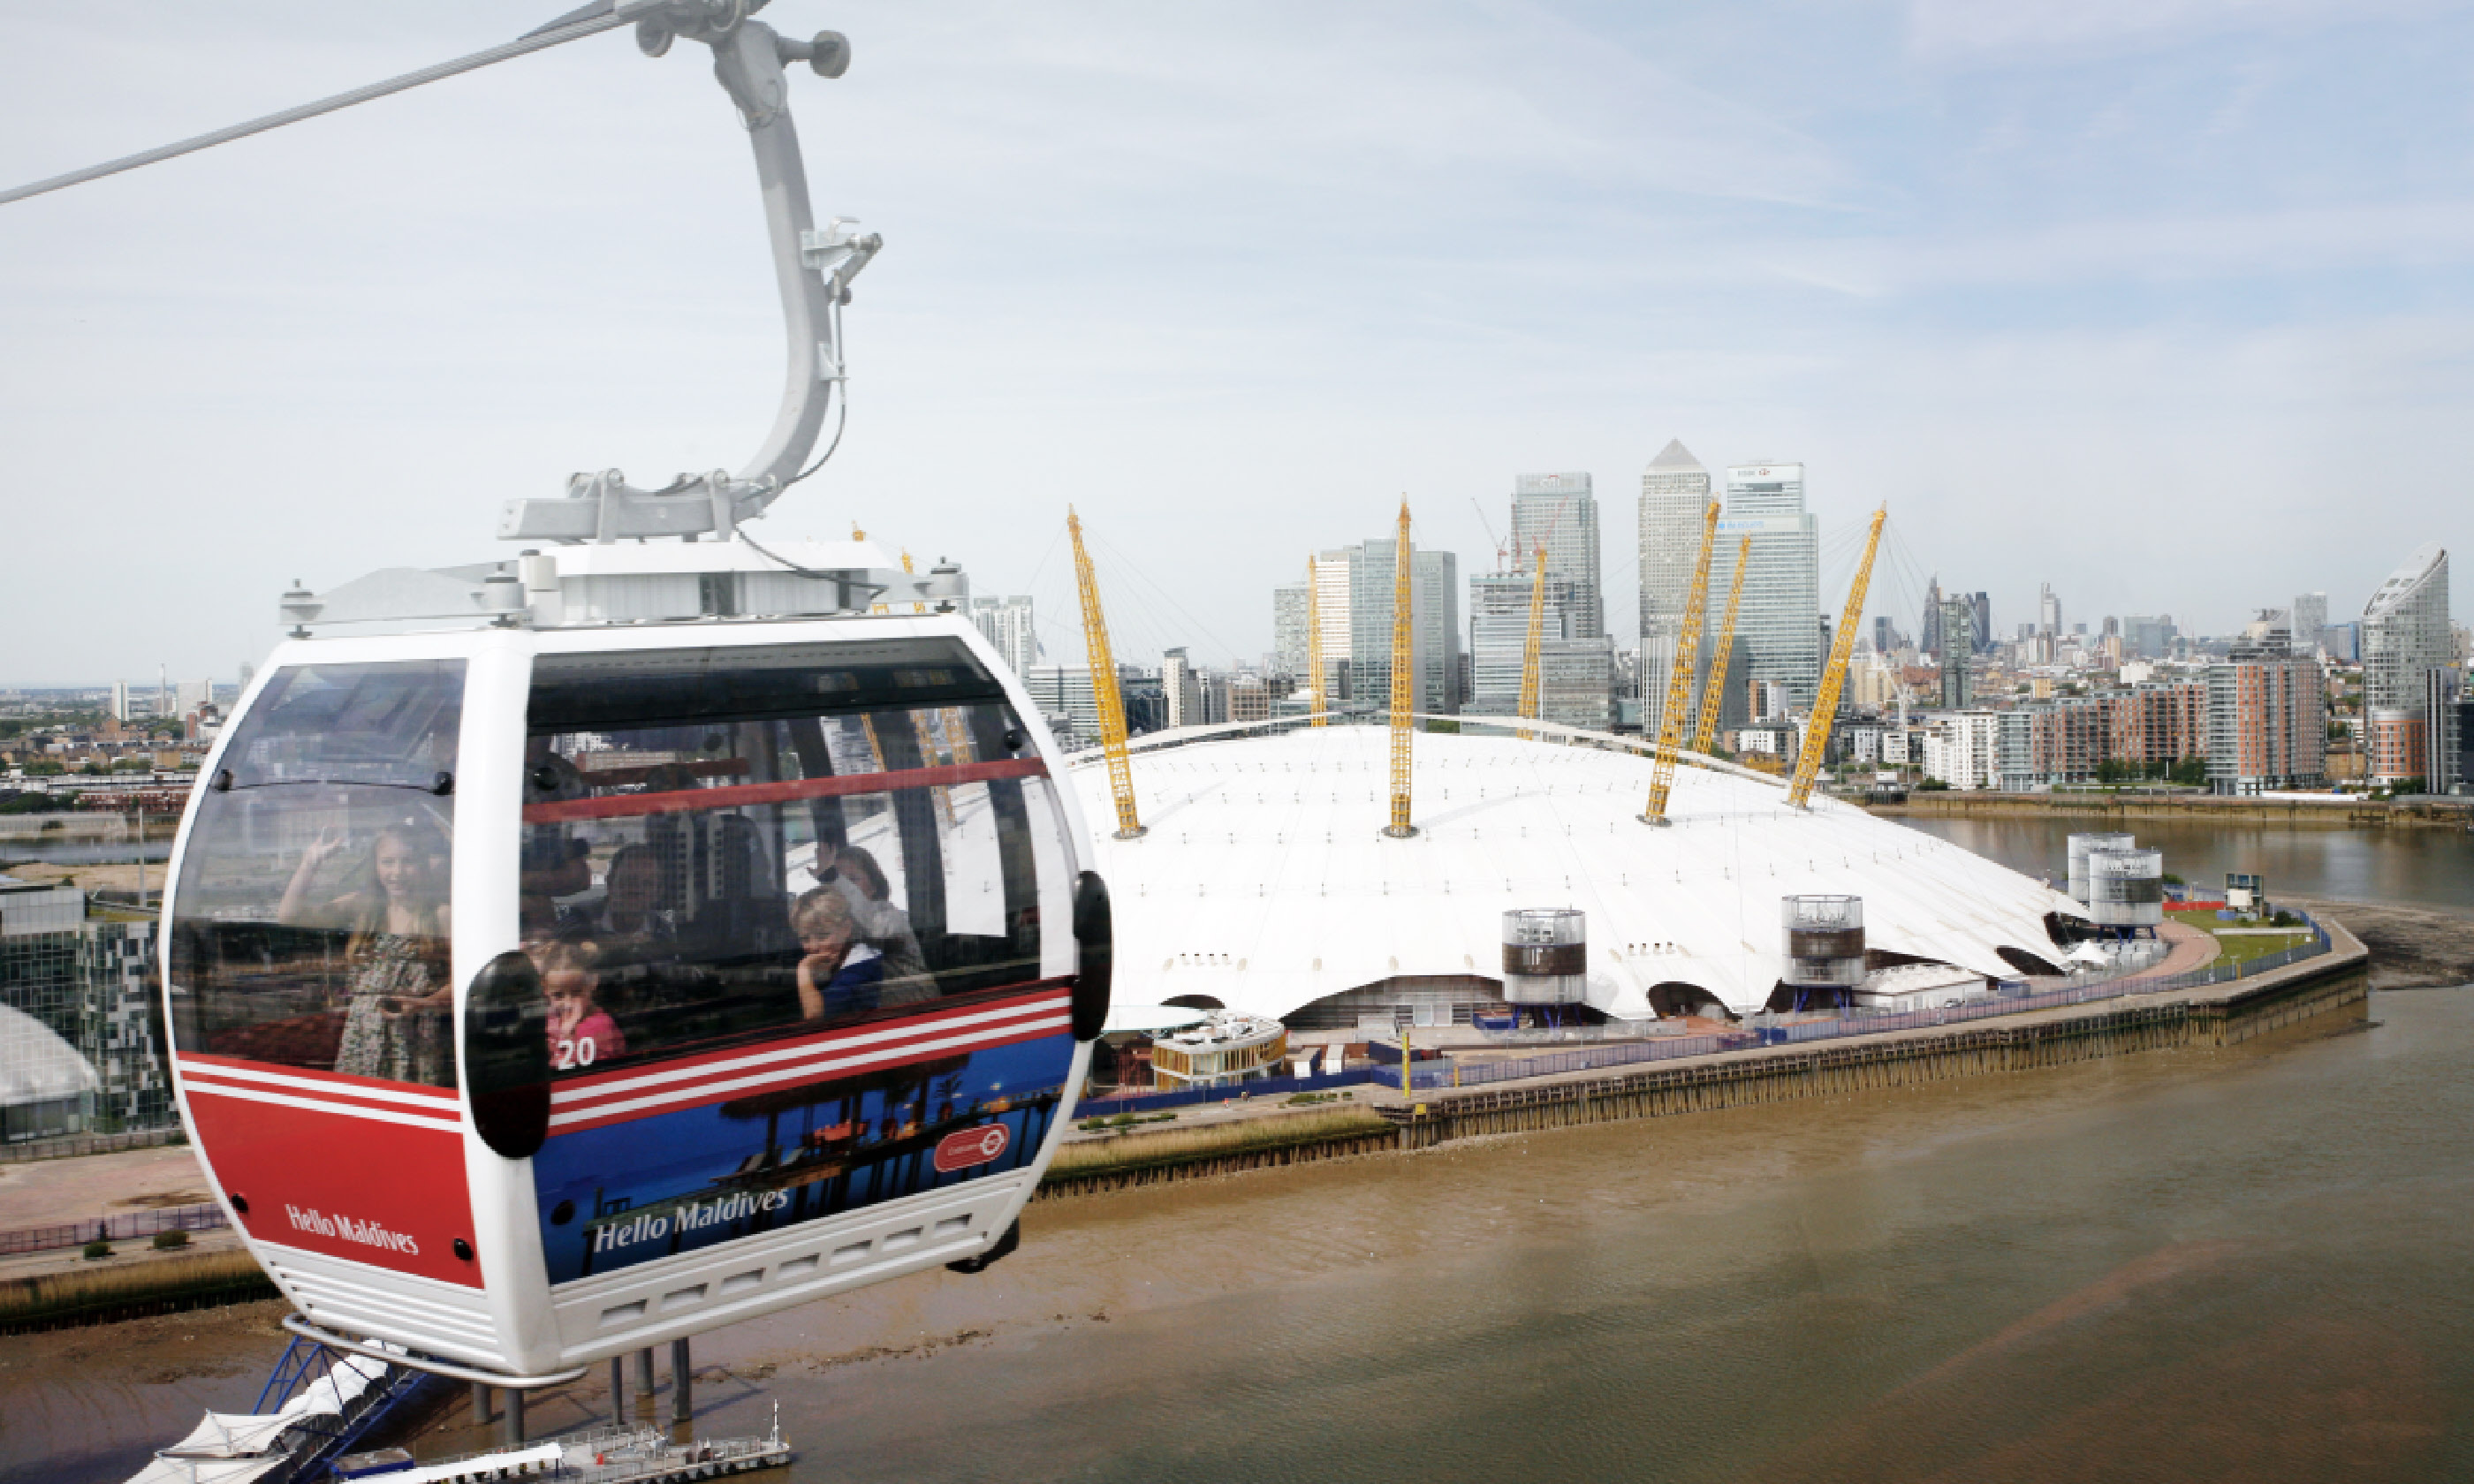 Gondolas of the Emirates Air Line cable car (Shutterstock)